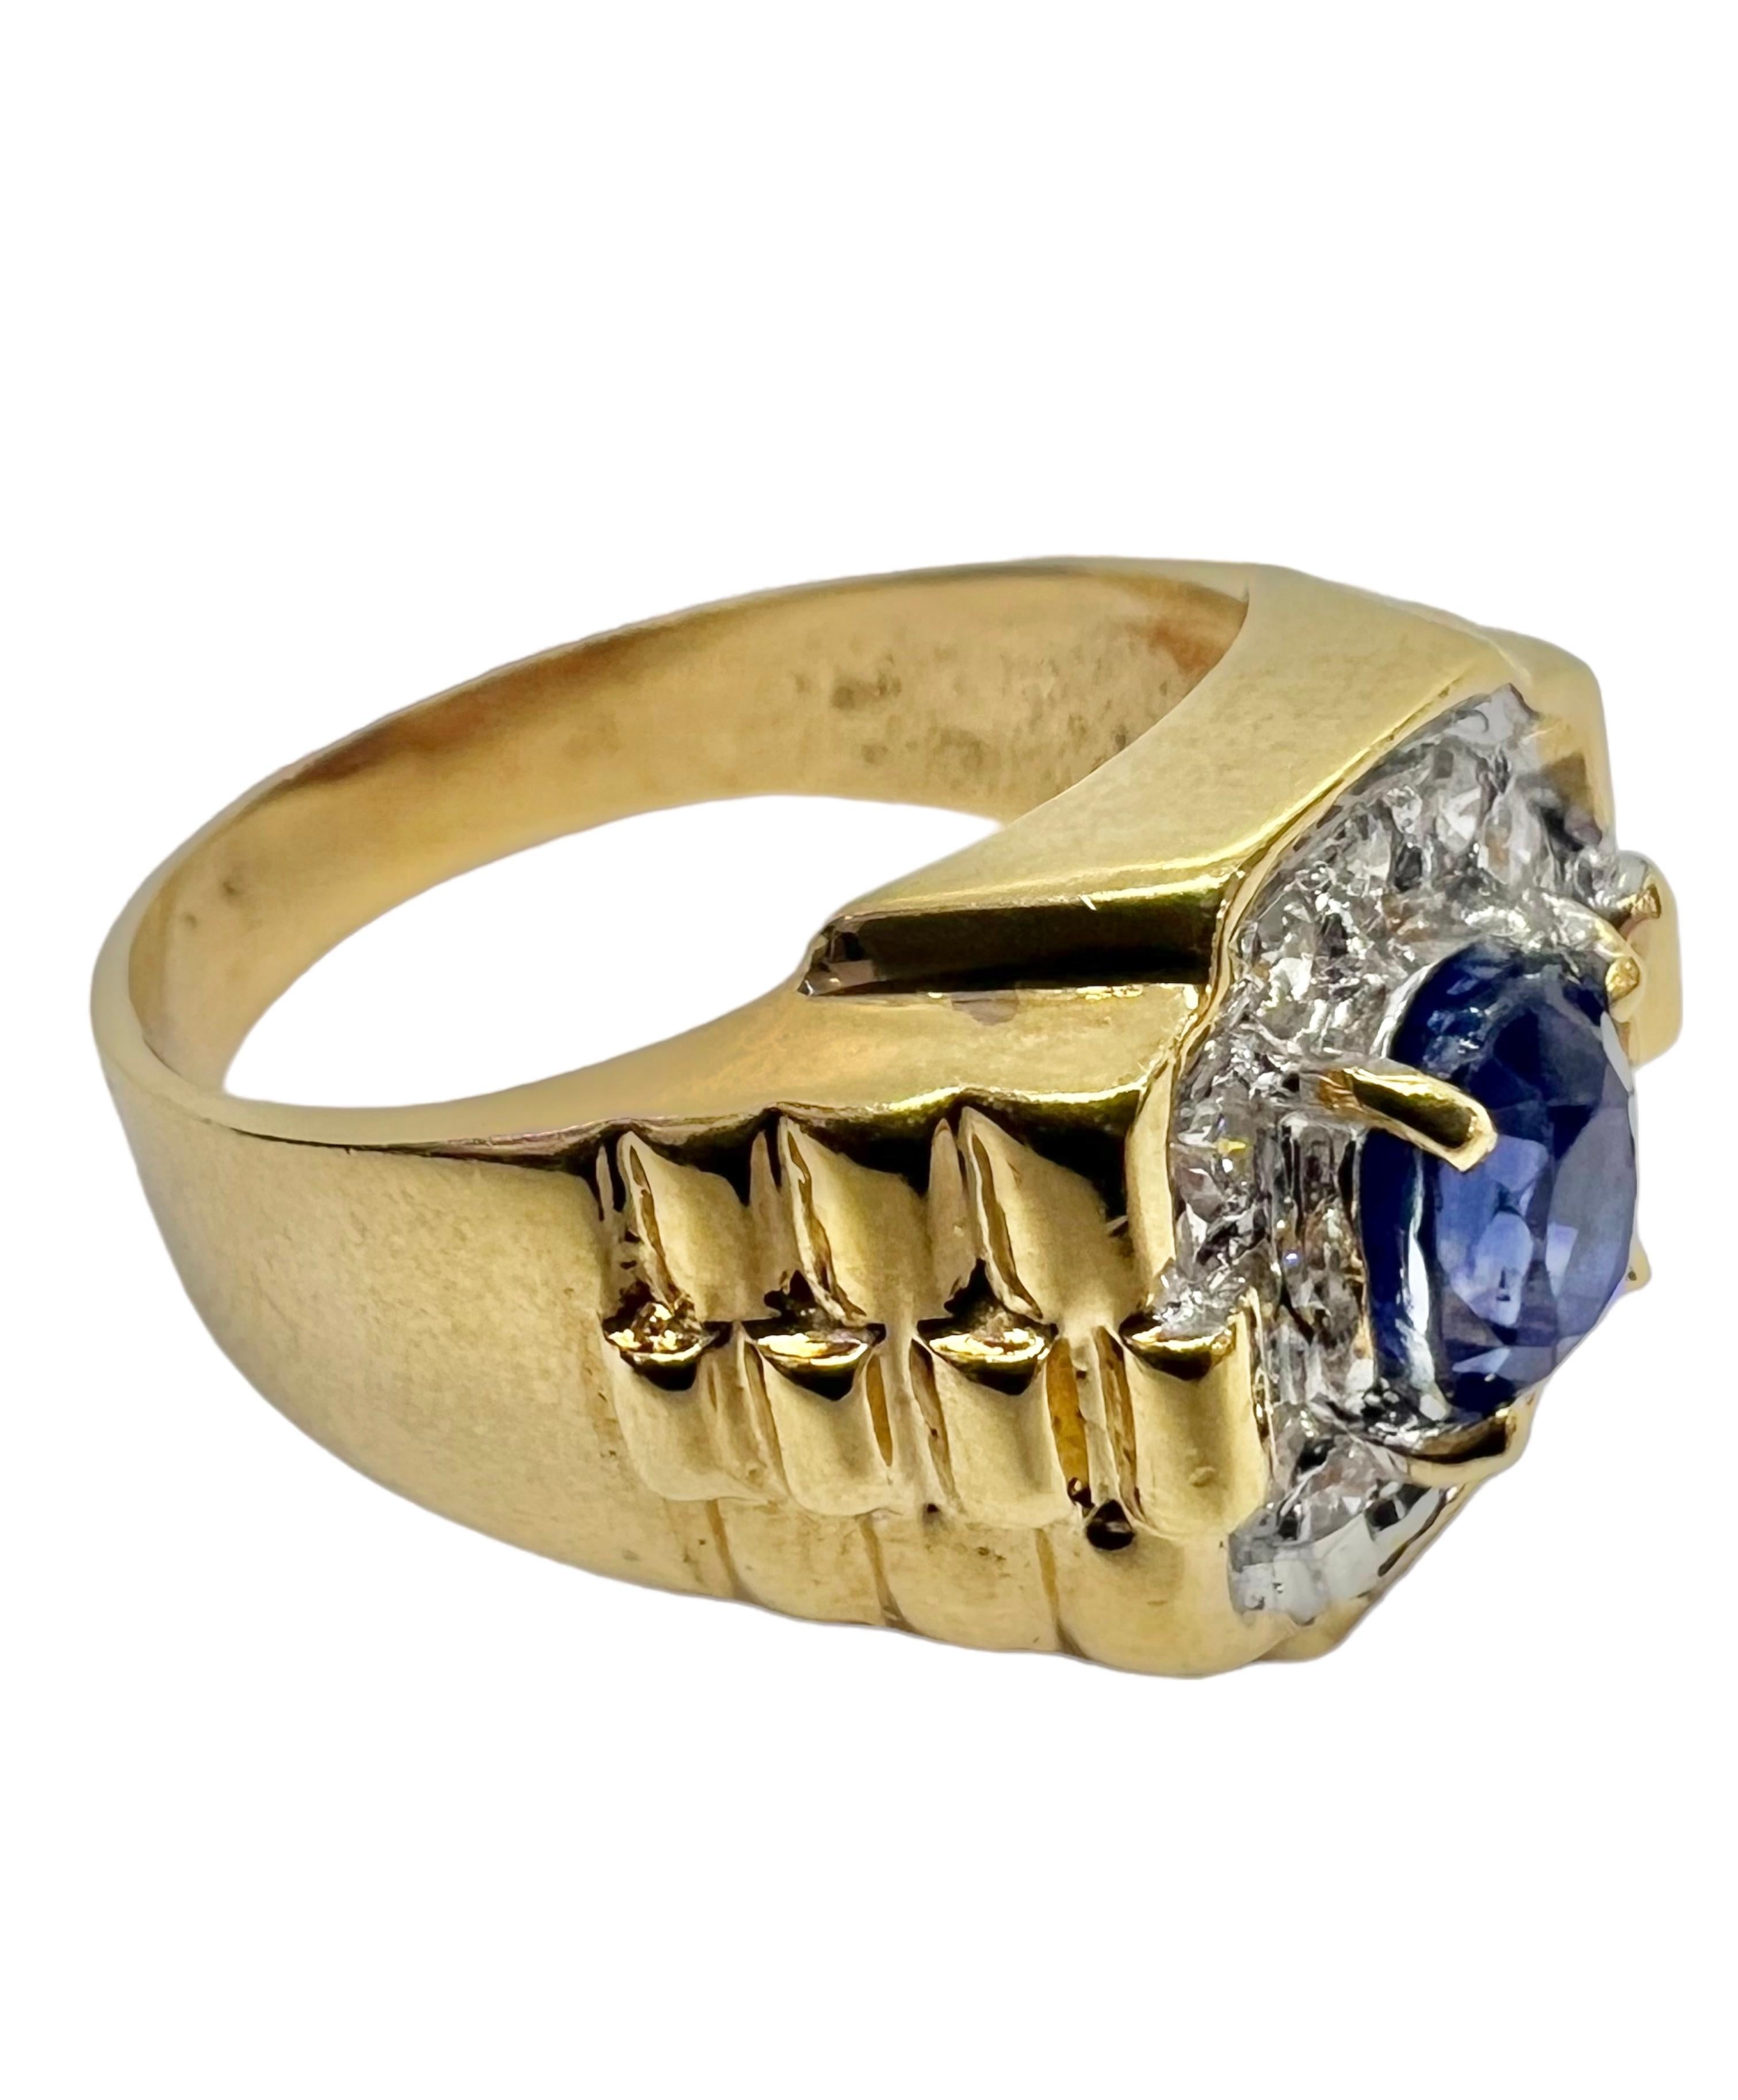 18K yellow gold ring with blue sapphire and small diamonds.

Sophia D by Joseph Dardashti LTD has been known worldwide for 35 years and are inspired by classic Art Deco design that merges with modern manufacturing techniques.